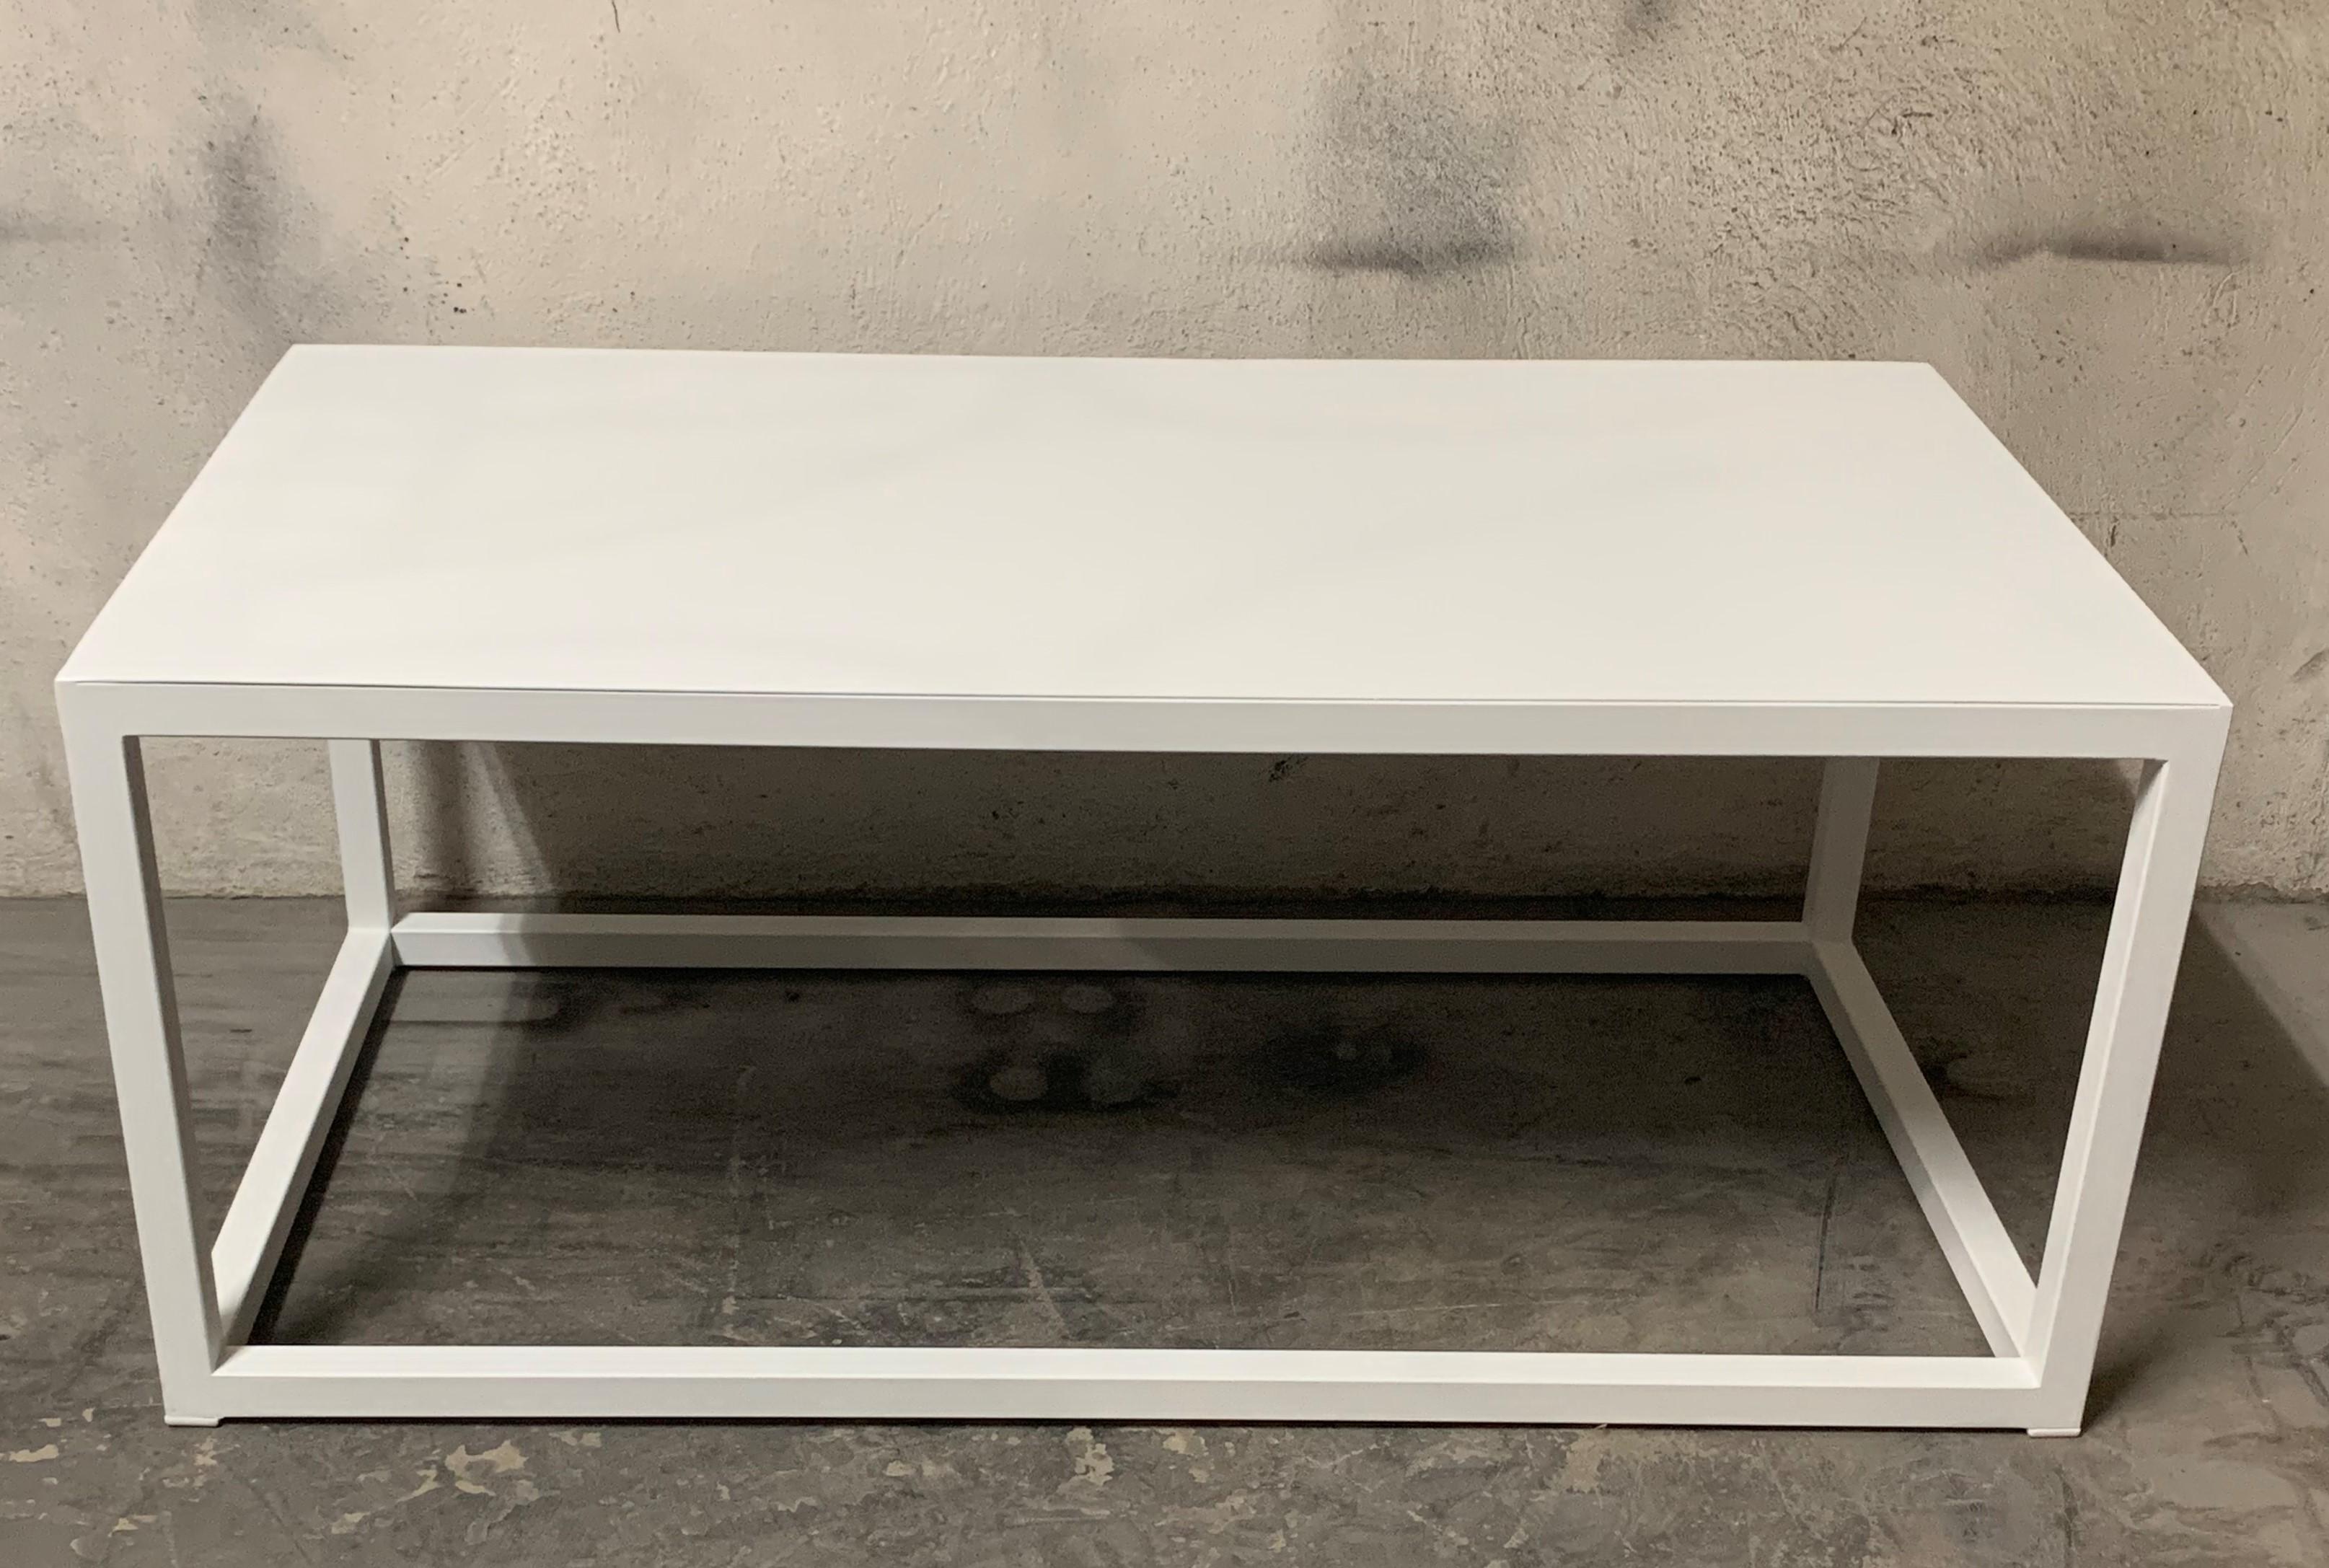 Spanish New Modern Rectangular White Table with Metal Top, Indoor or Outdoor For Sale